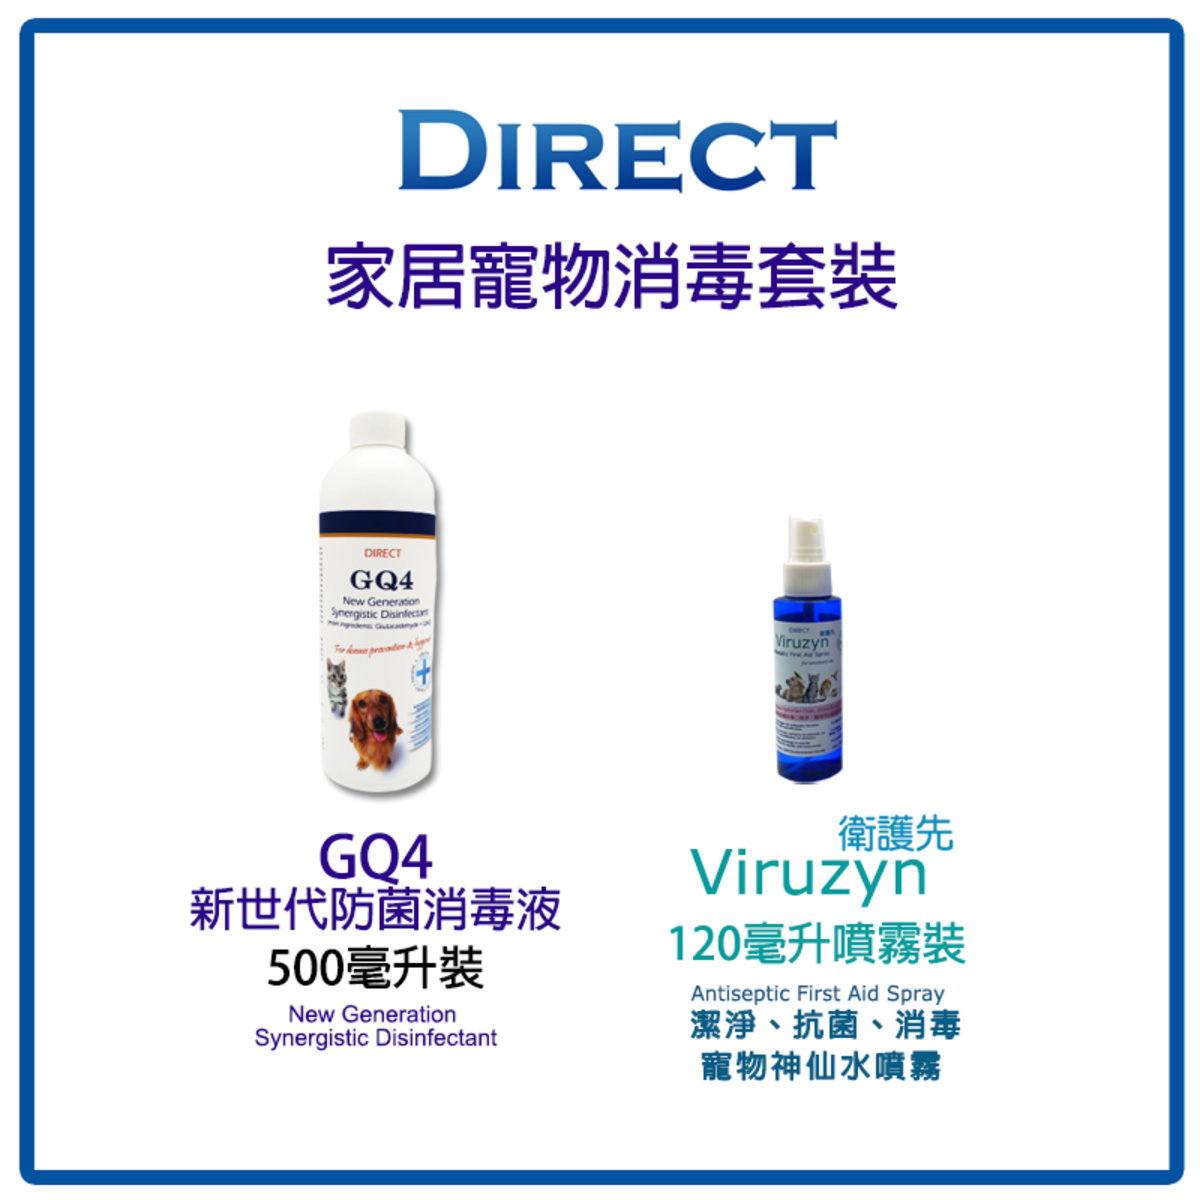 Pet and Home Disinfectant Package